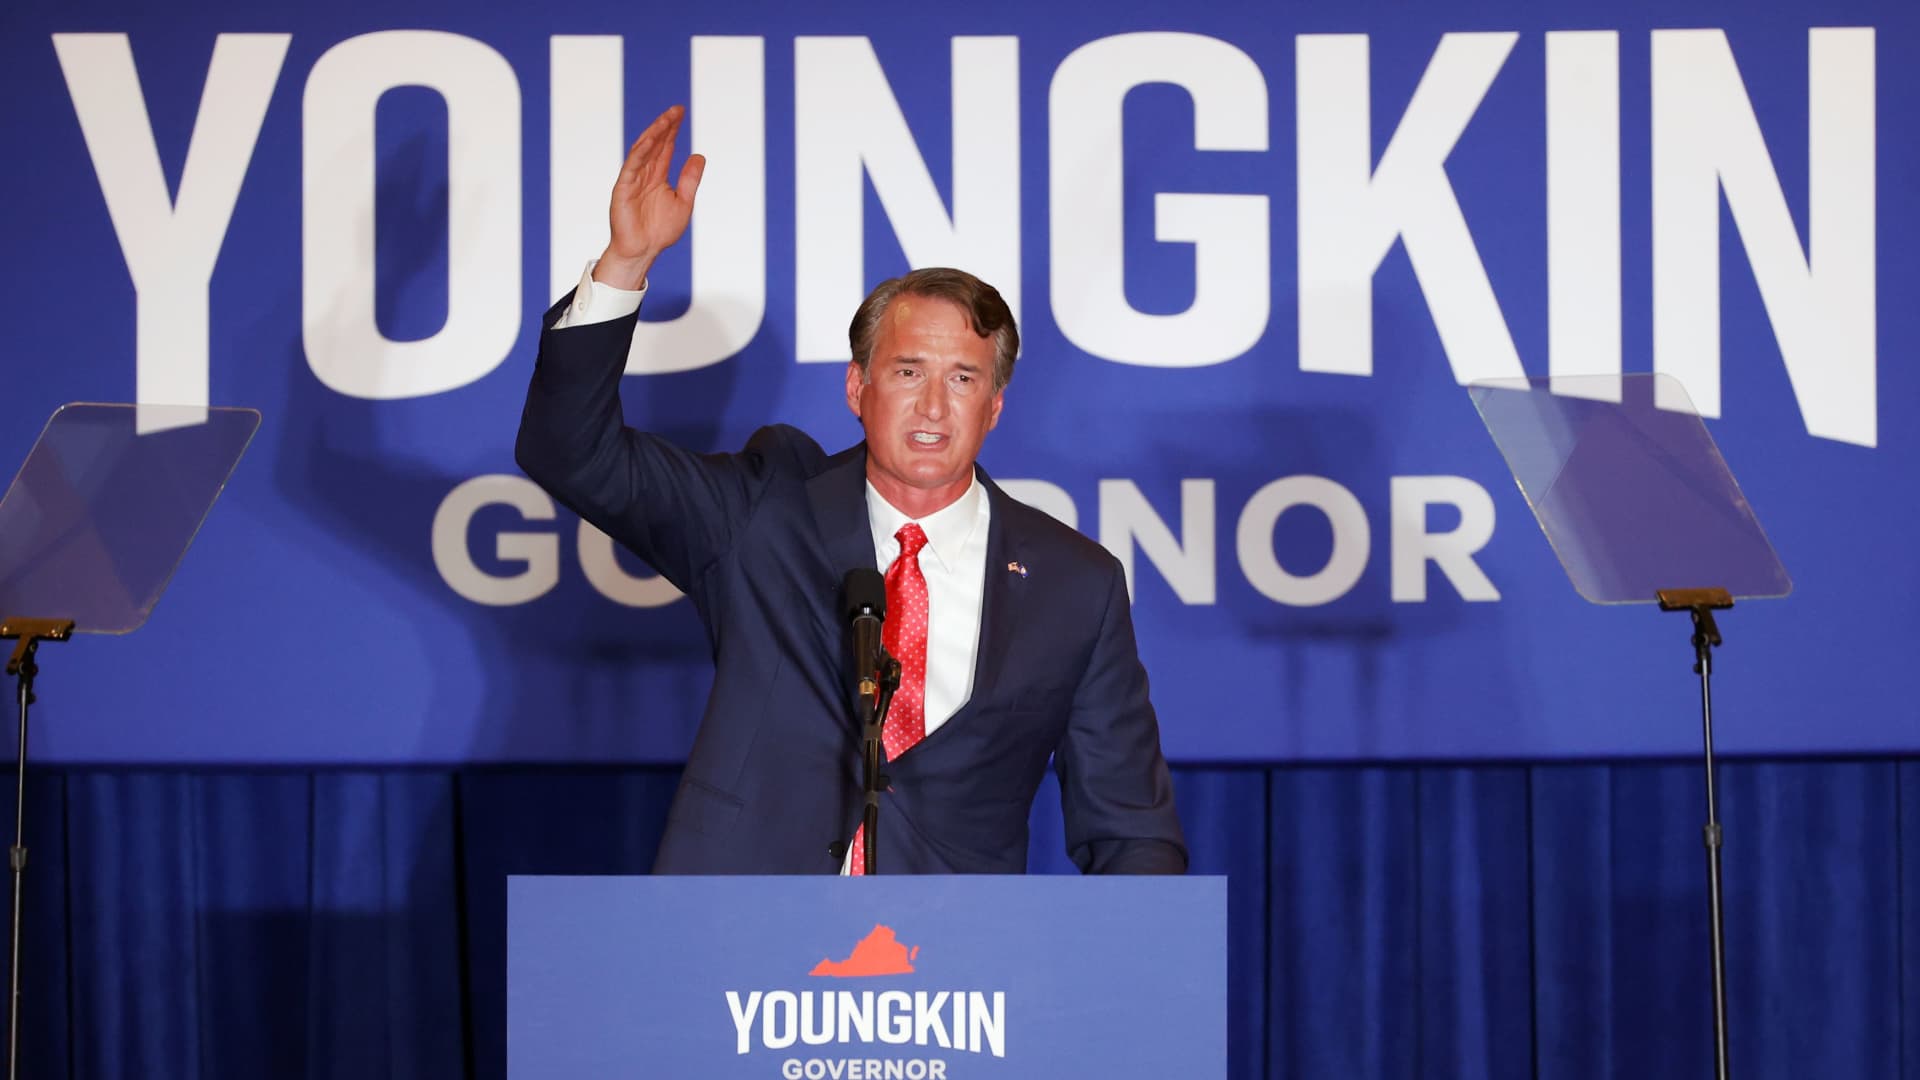 Virginia Republican gubernatorial nominee Glenn Youngkin speaks during his election night party at a hotel in Chantilly, Virginia, U.S., November 3, 2021.